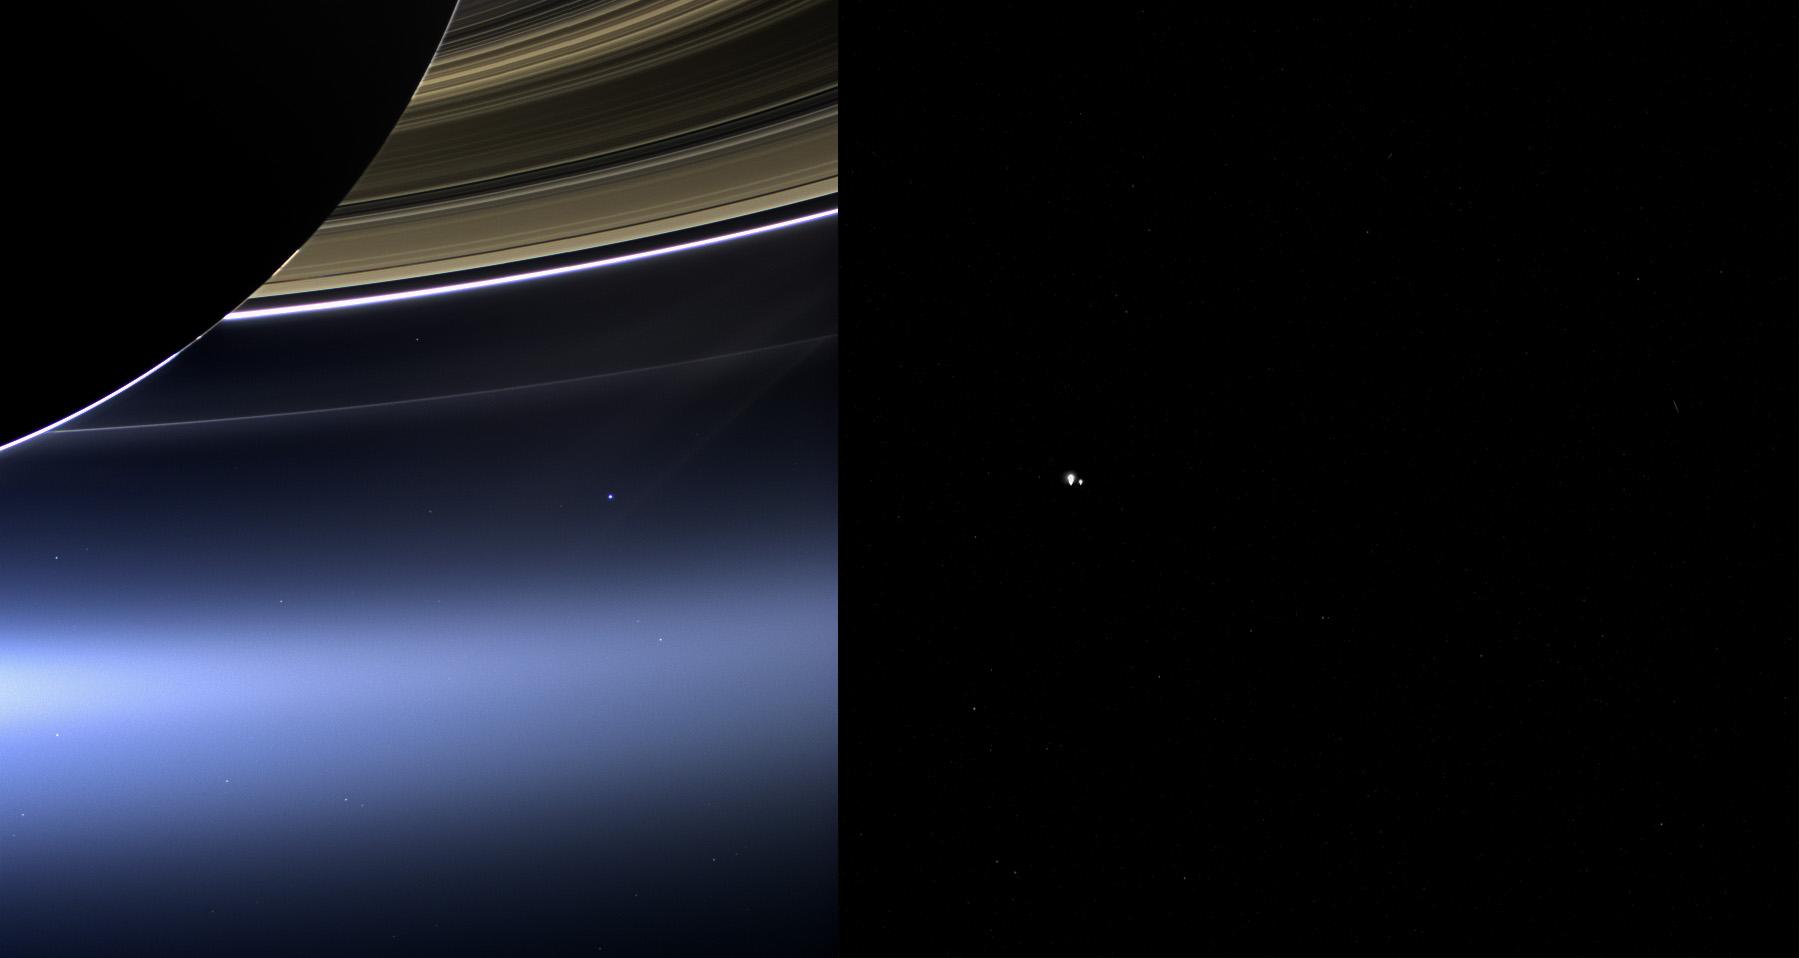 Earth from Cassini and MESSENGER